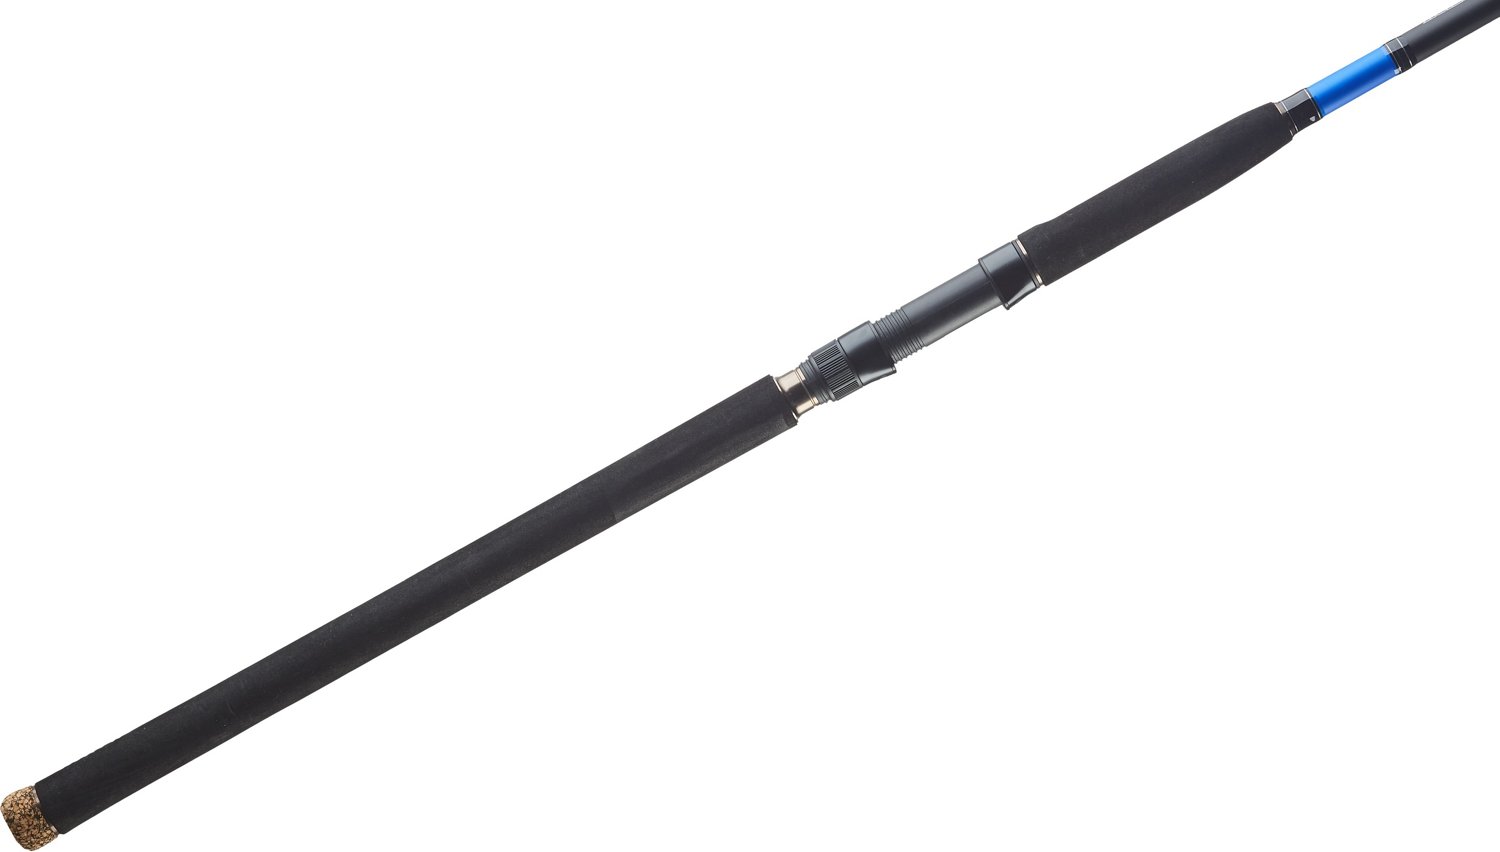 Daiwa Beefstick 10 ft MH Surf Spinning Rod